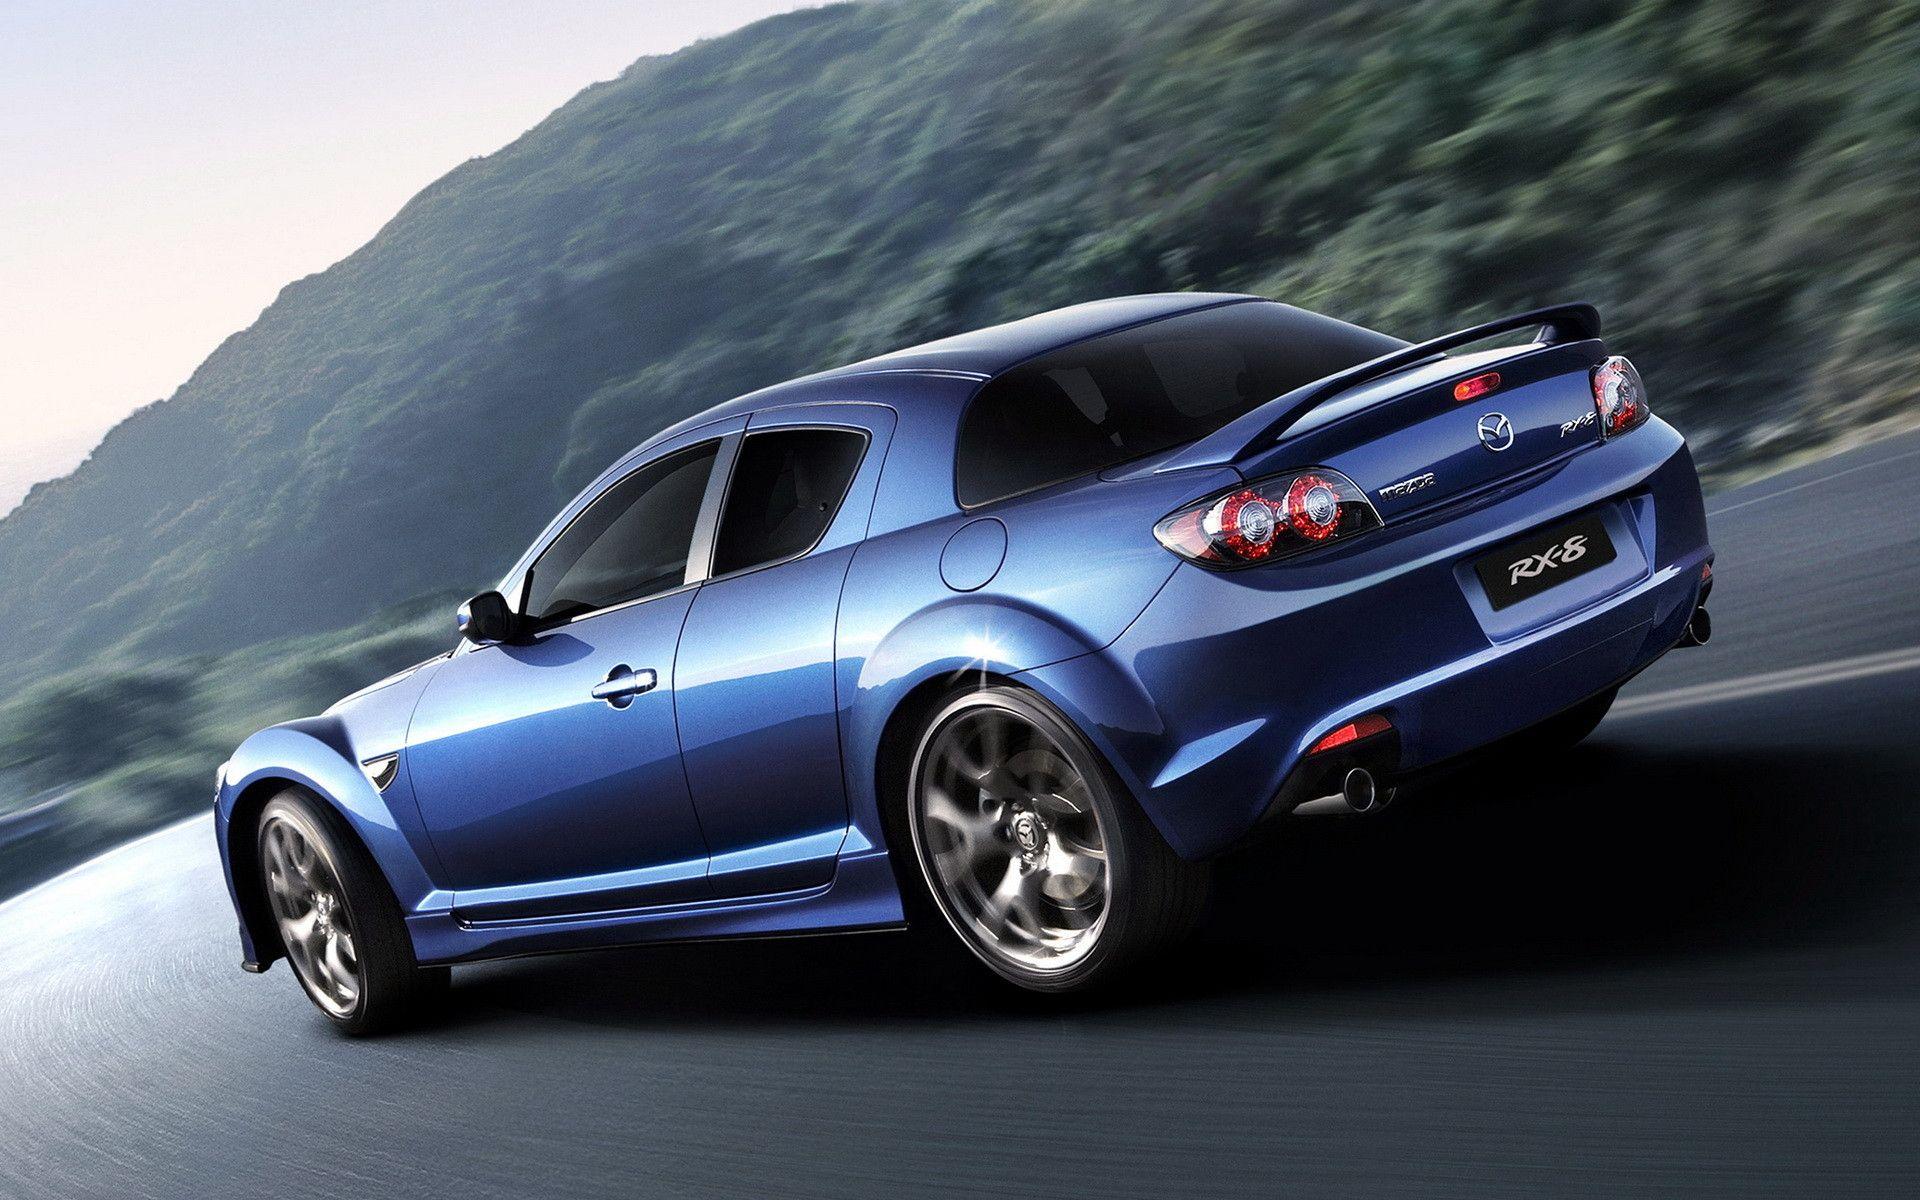 Mazda RX 8 Wallpaper HD Image Free 20941. Best Cars Picture